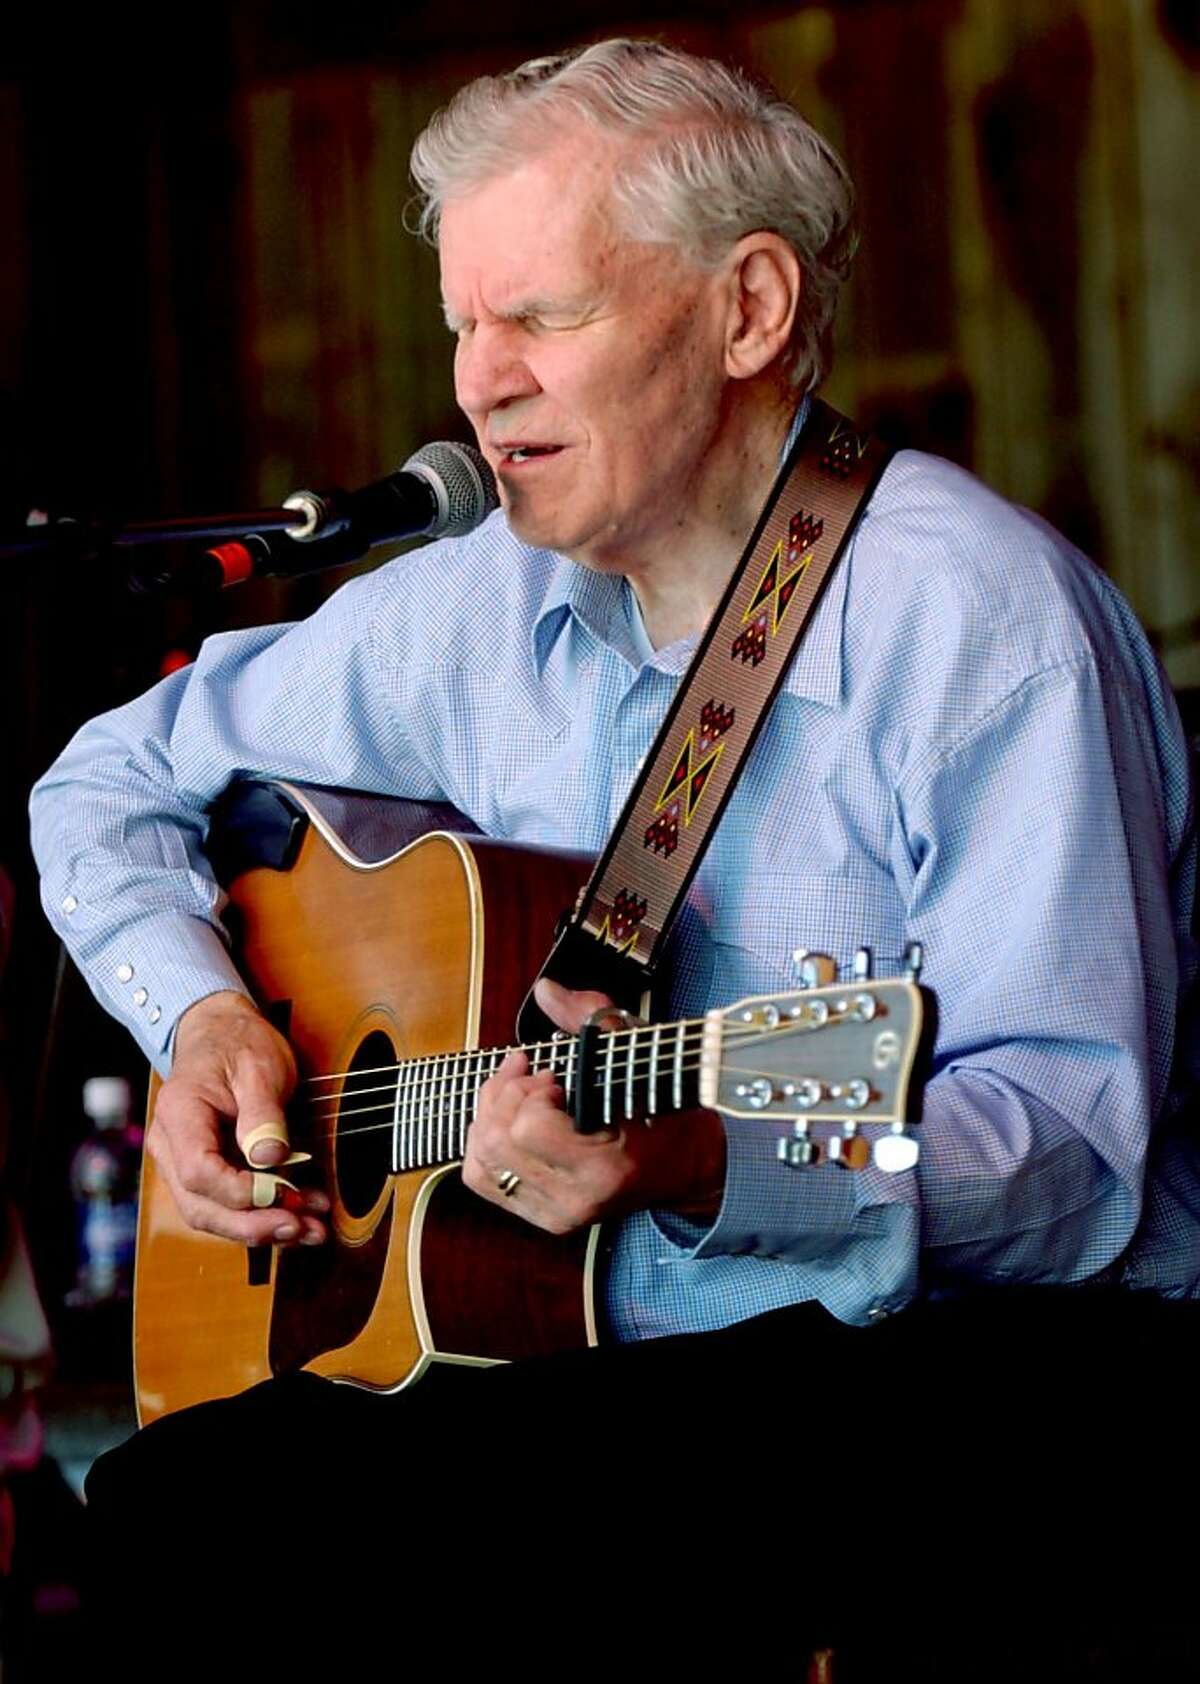 master flatpicker Doc Watson plays during the "My Friend Merle" show during MerleFest in Wilkesboro, N.C. Watson, the Grammy-award winning folk musician whose lightning-fast style of flatpicking influenced guitarists around the world for more than a half-century, died Tuesday, May 29, 2012 at a hospital in Winston-Salem, according to a hospital spokeswoman and his management company. He was 89. (AP Photo/The Winston-Salem Journal, Lauren Carroll)